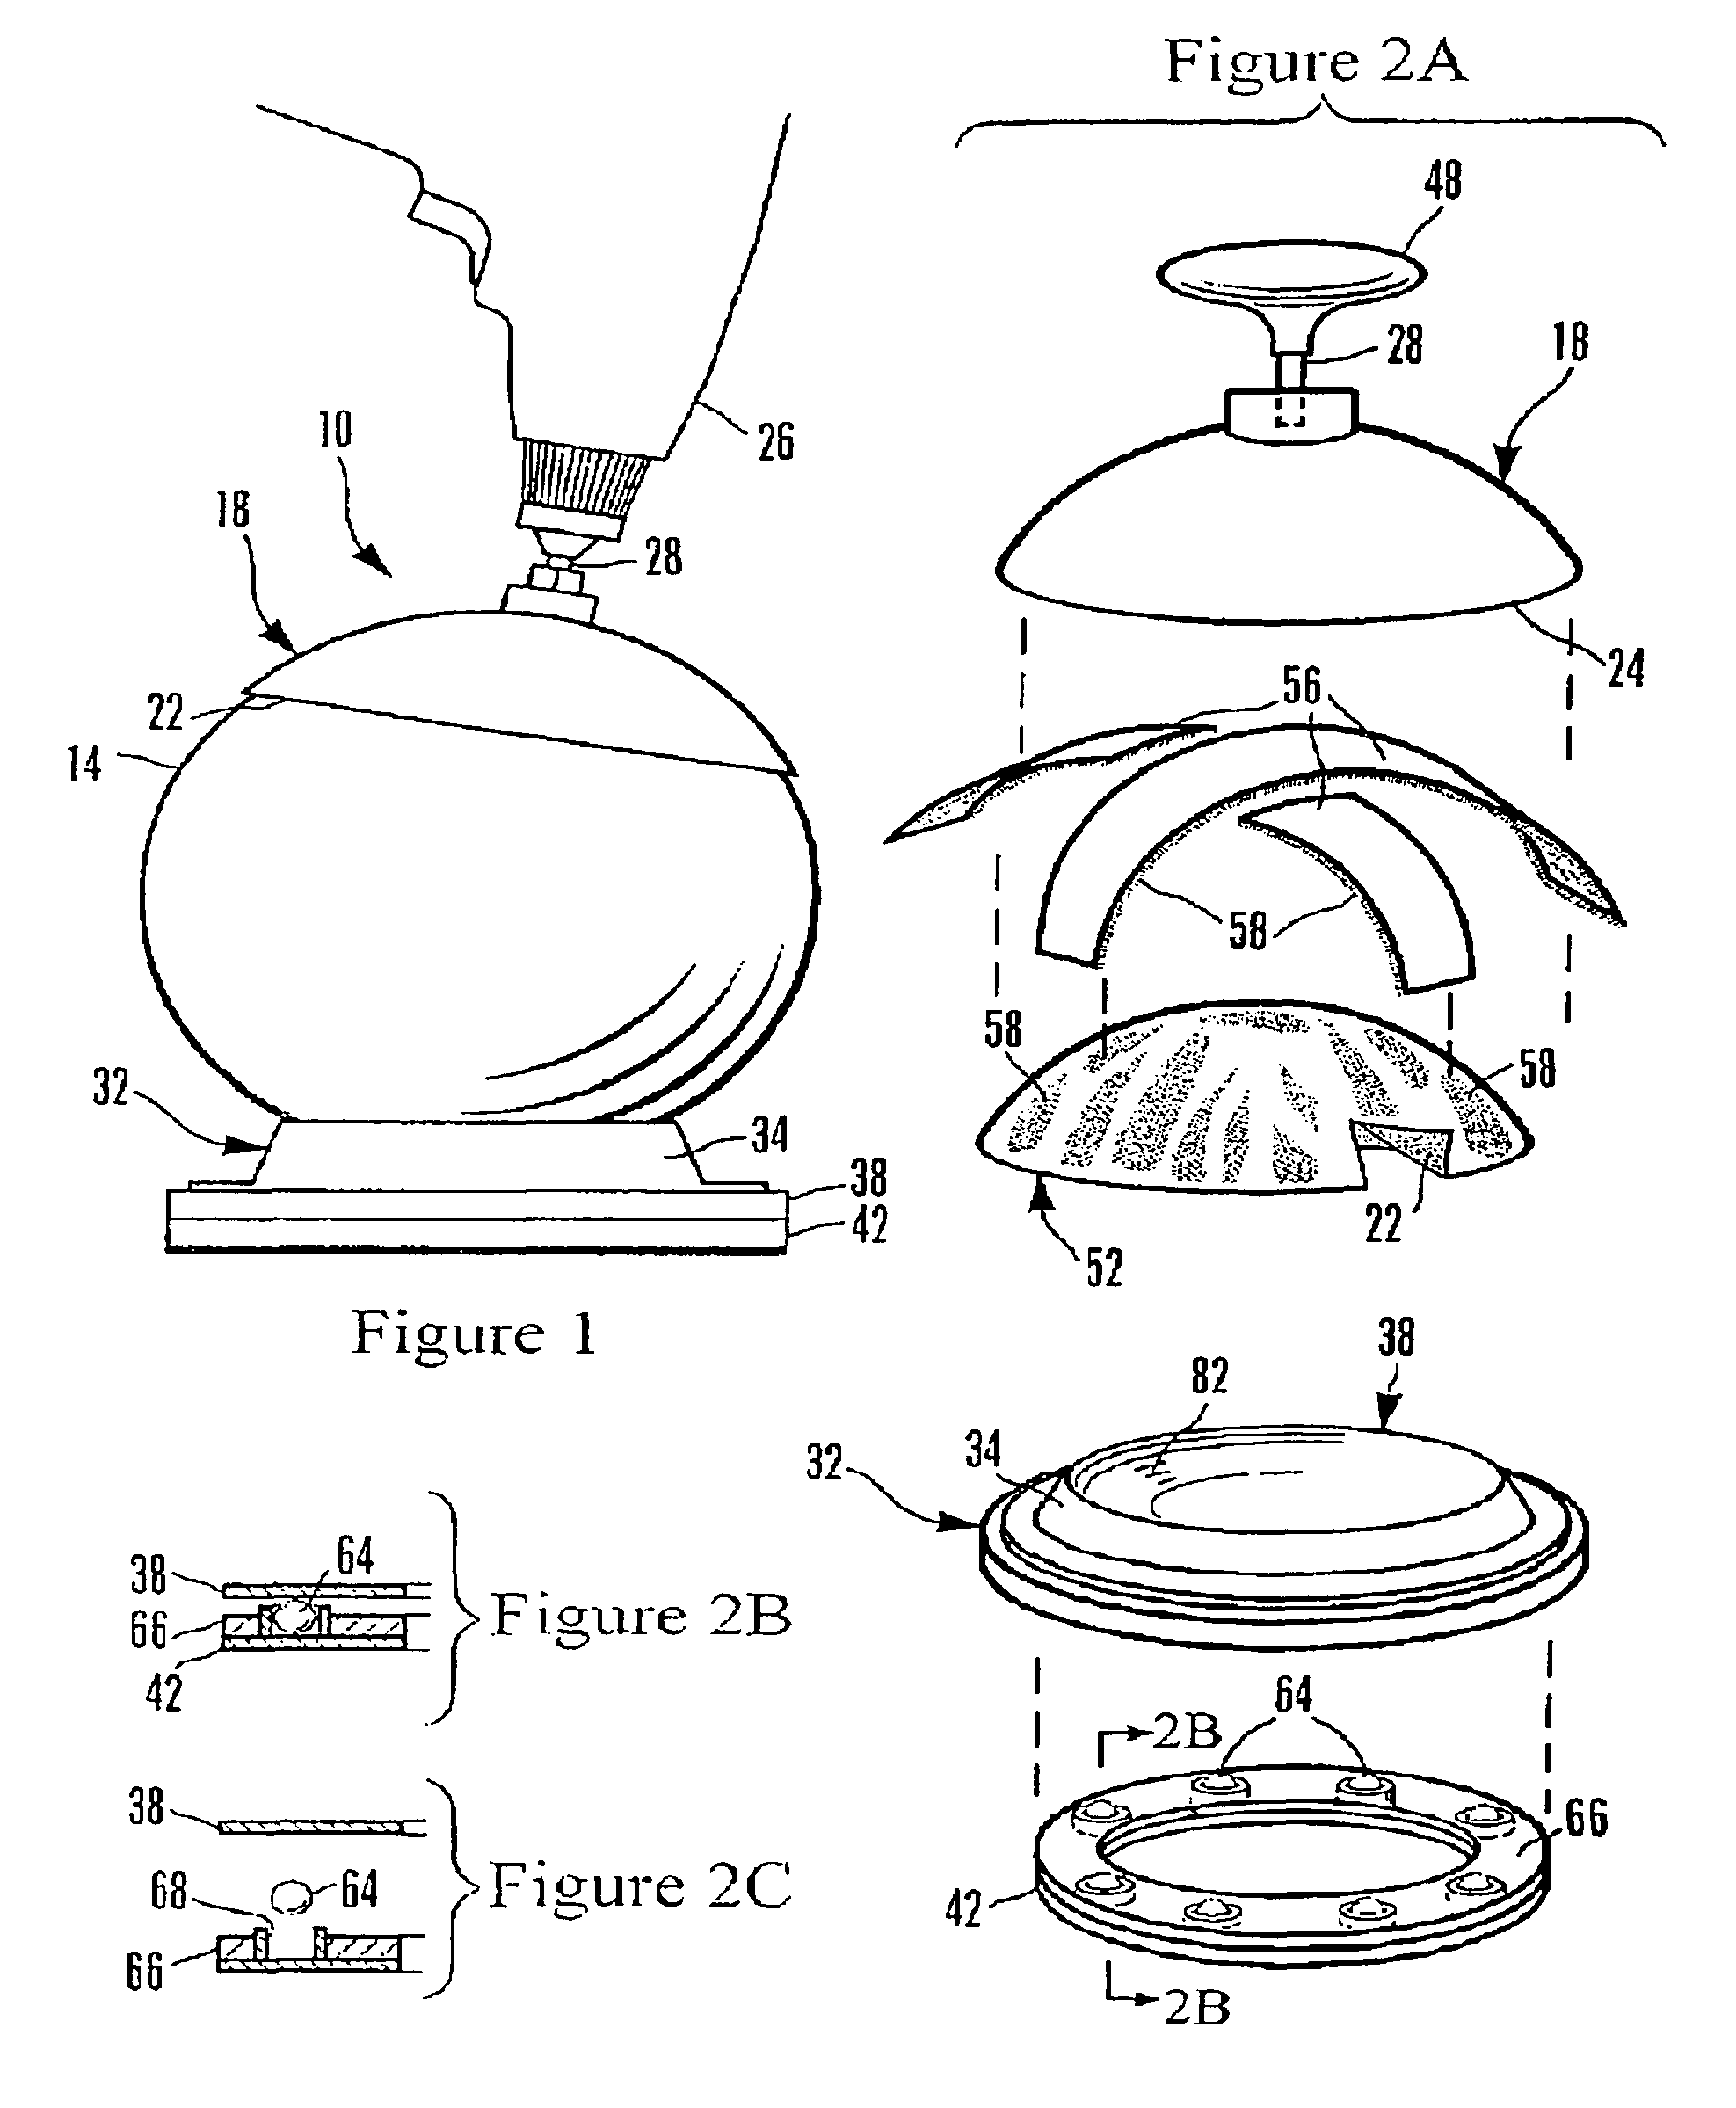 Bowling ball abrader and polisher system and method